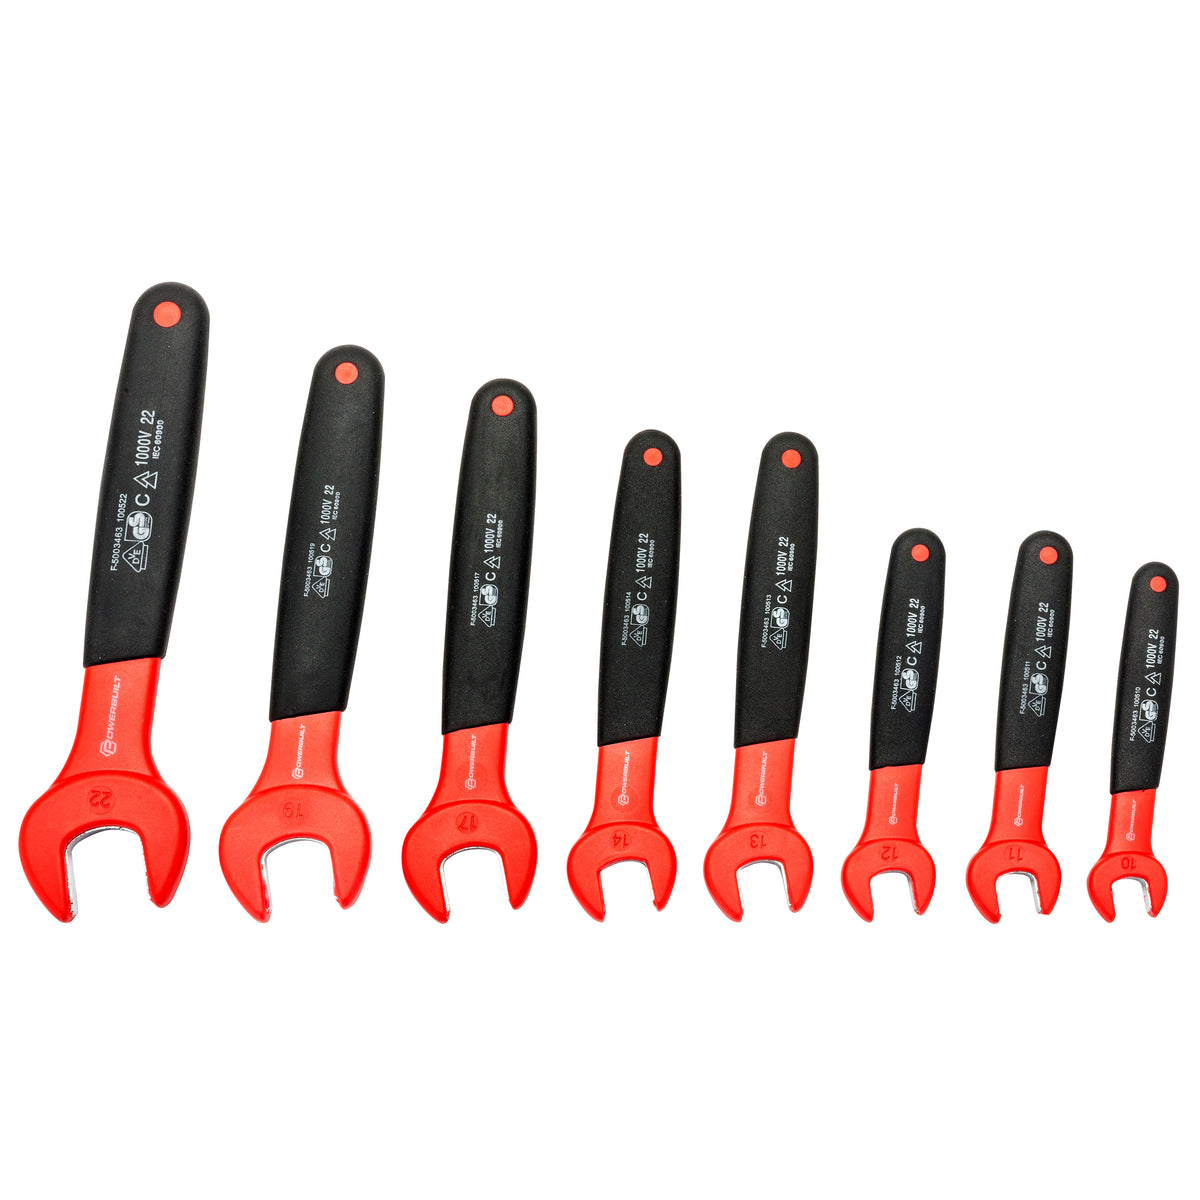 8 Piece Insulated VDE Open End Wrench Set (Metric)